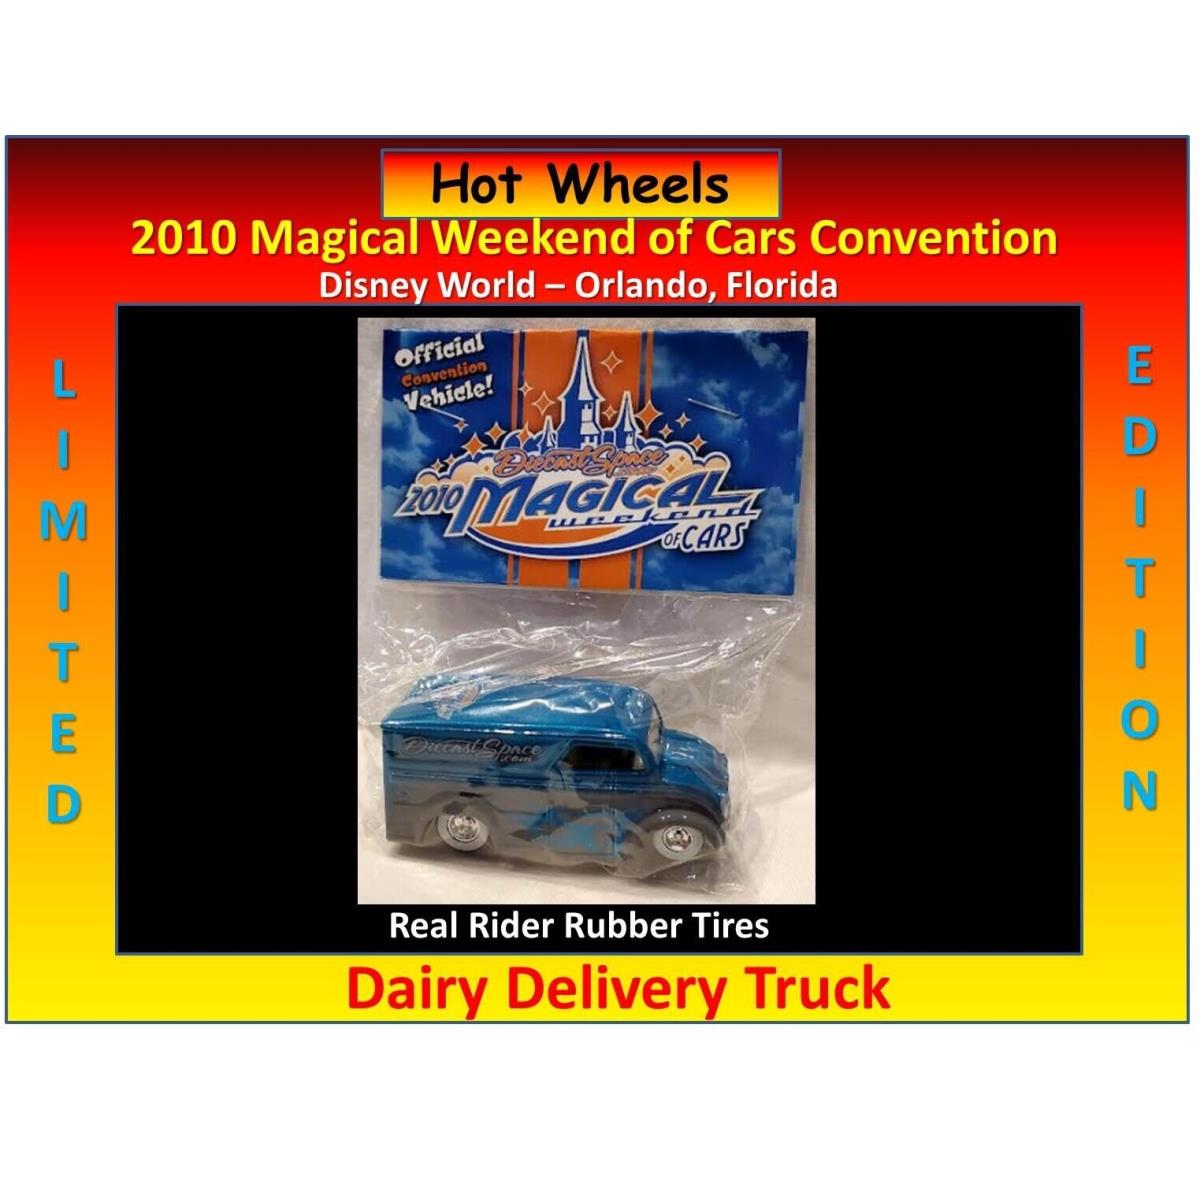 Hot Wheels Magical Weekend Cars Convention Disney Orlando Dairy Delivery 1 of 20